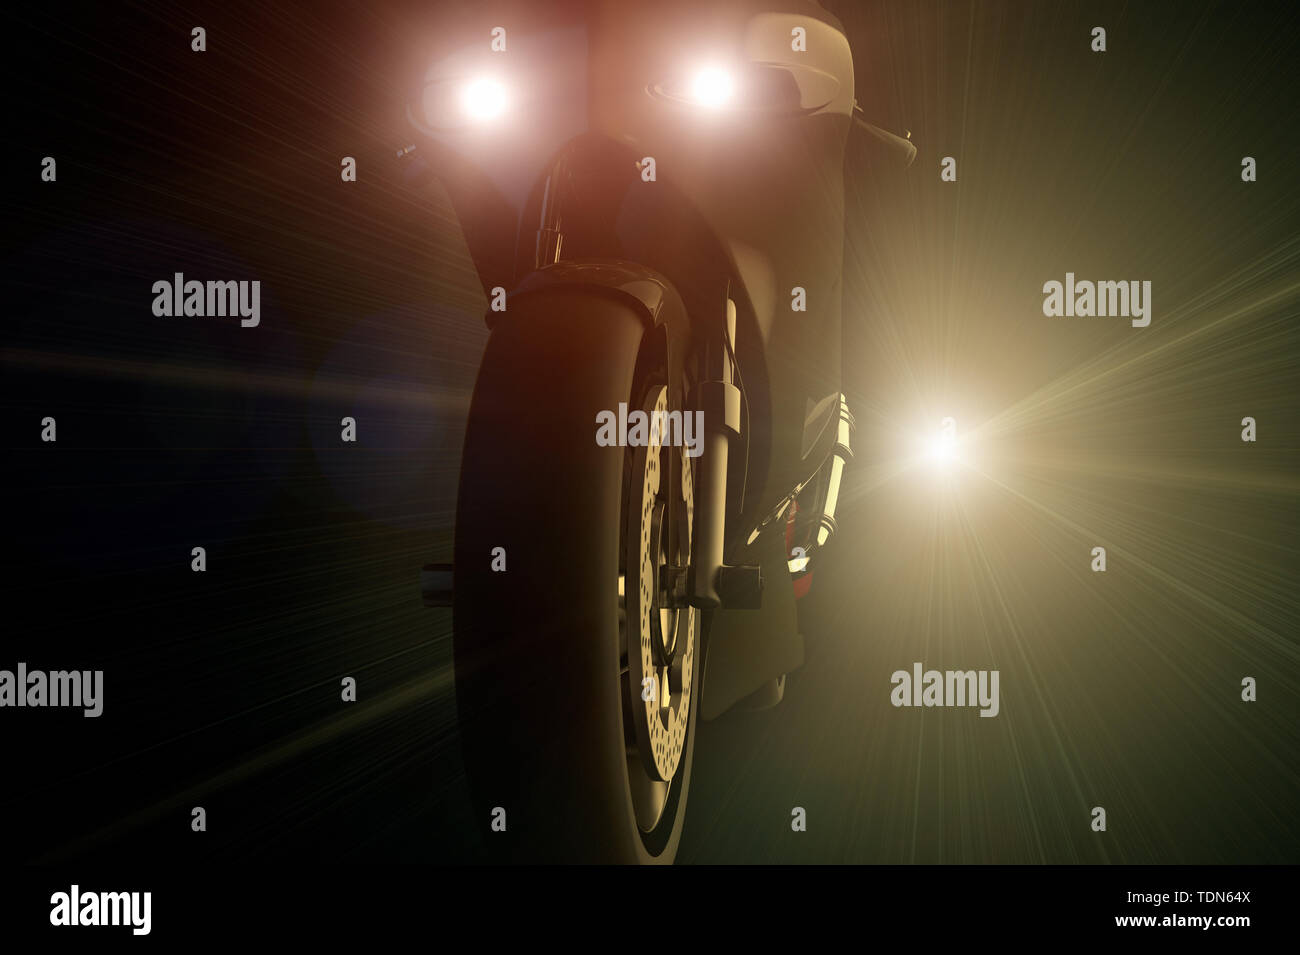 3D rendering of a motorcycle being chased by a bright light at night Stock Photo